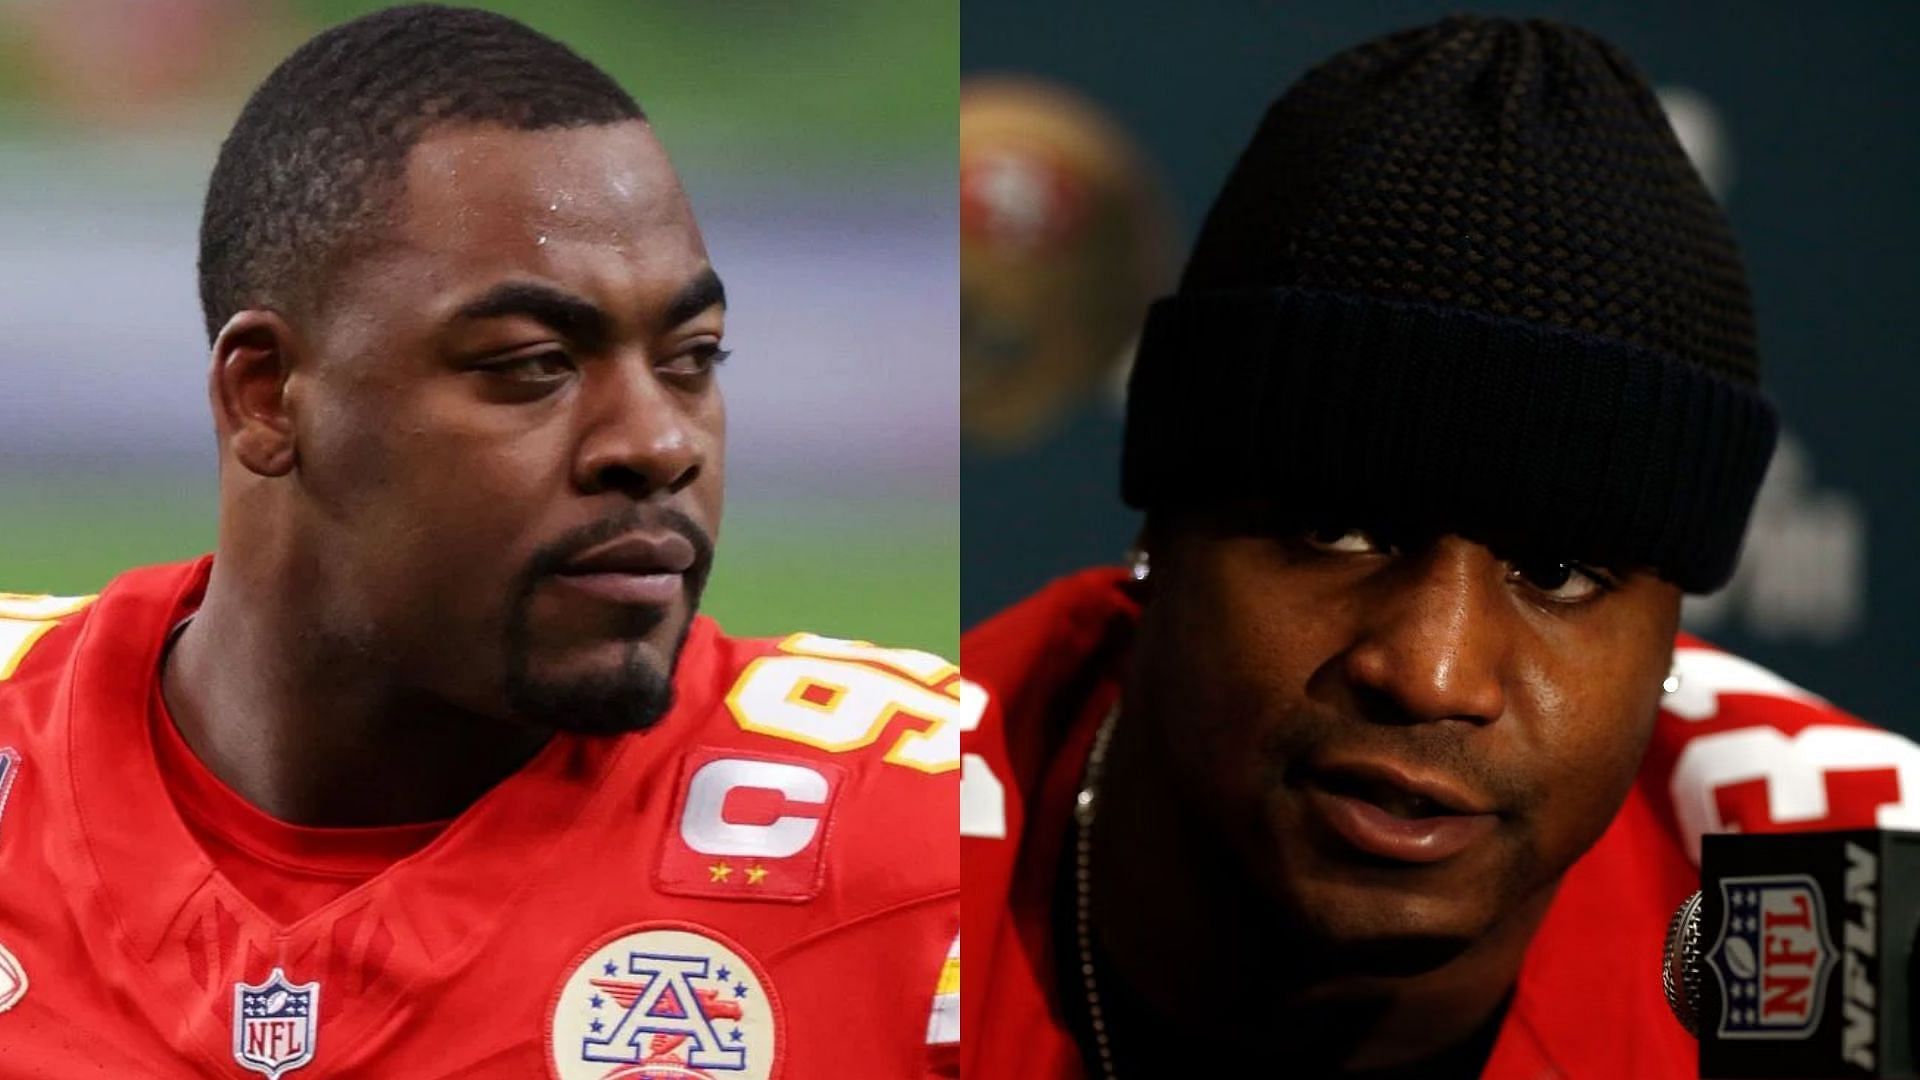 Kansas City Chiefs defensive tackle Chris Jones and former NFL safety Donte Whitner